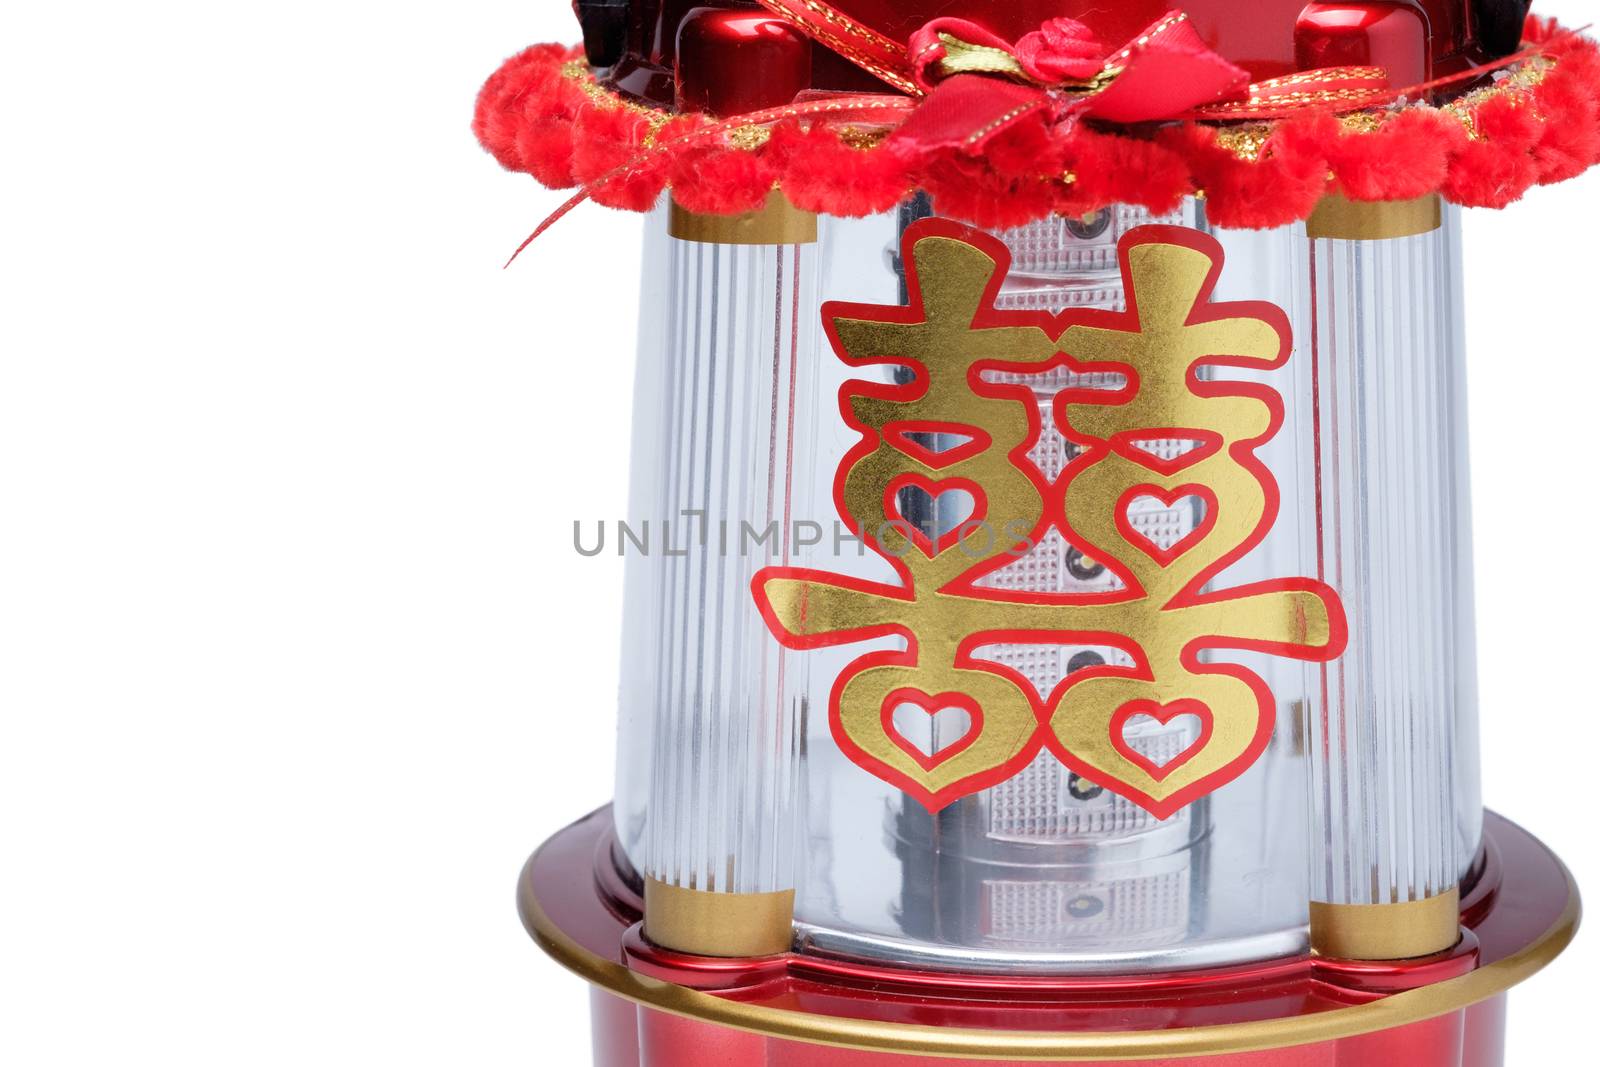 Chinese LED lantern lamp with golden Chinese double happiness symbol sign called "shuang xi"